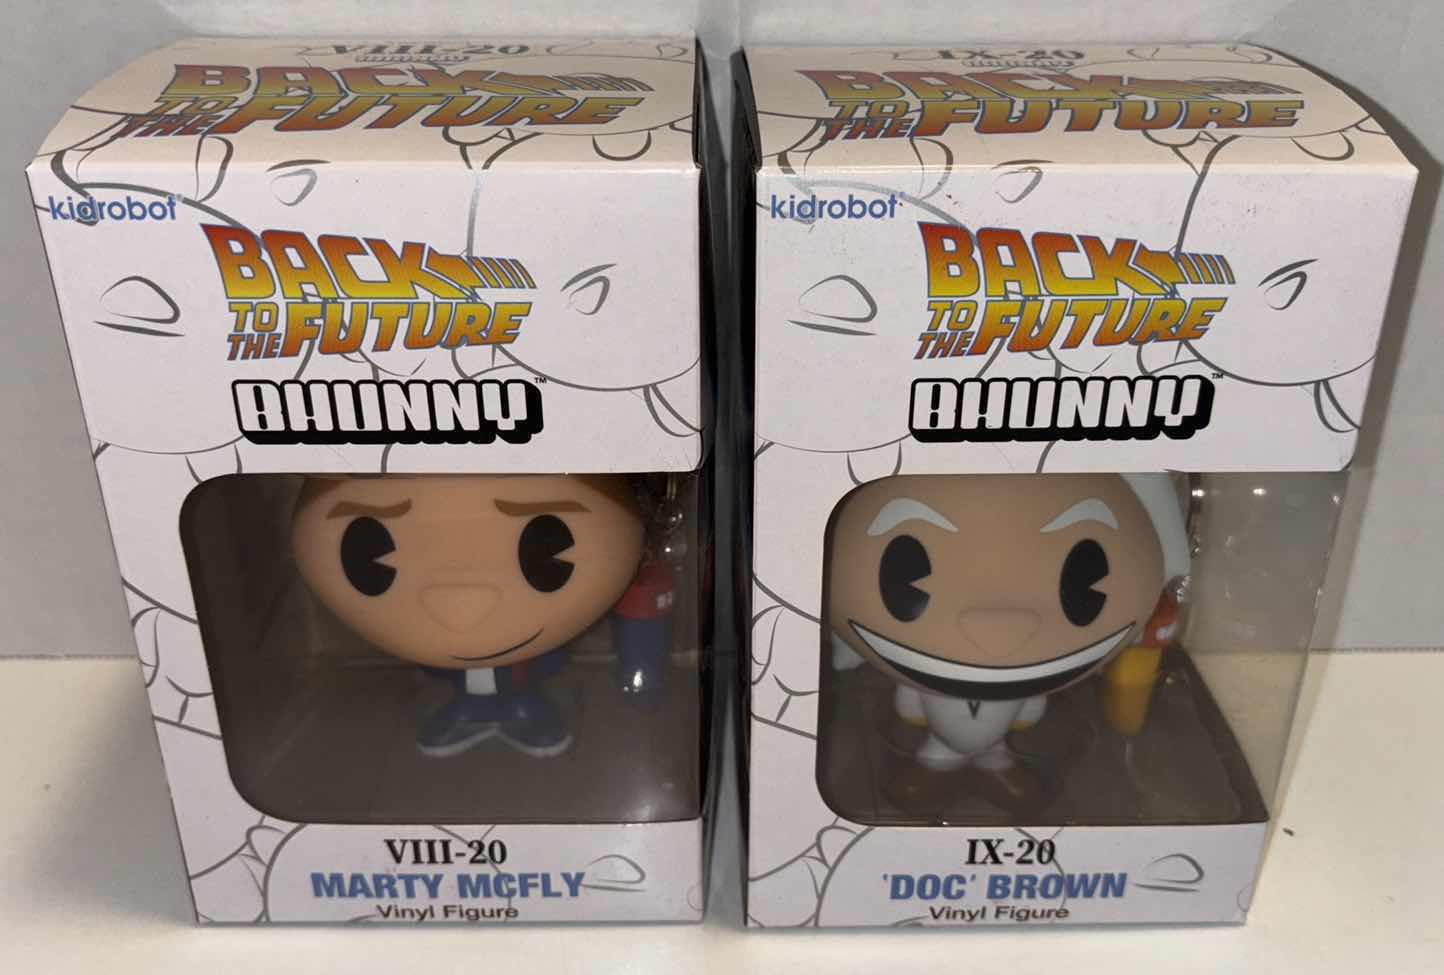 Photo 1 of NEW KIDROBOT BACK TO THE FUTURE 2-PACK BHUNNY 4” VINYL FIGURE, MARTY MCFLY & DOC BROWN W BHUNNY PAW KEYCHAIN